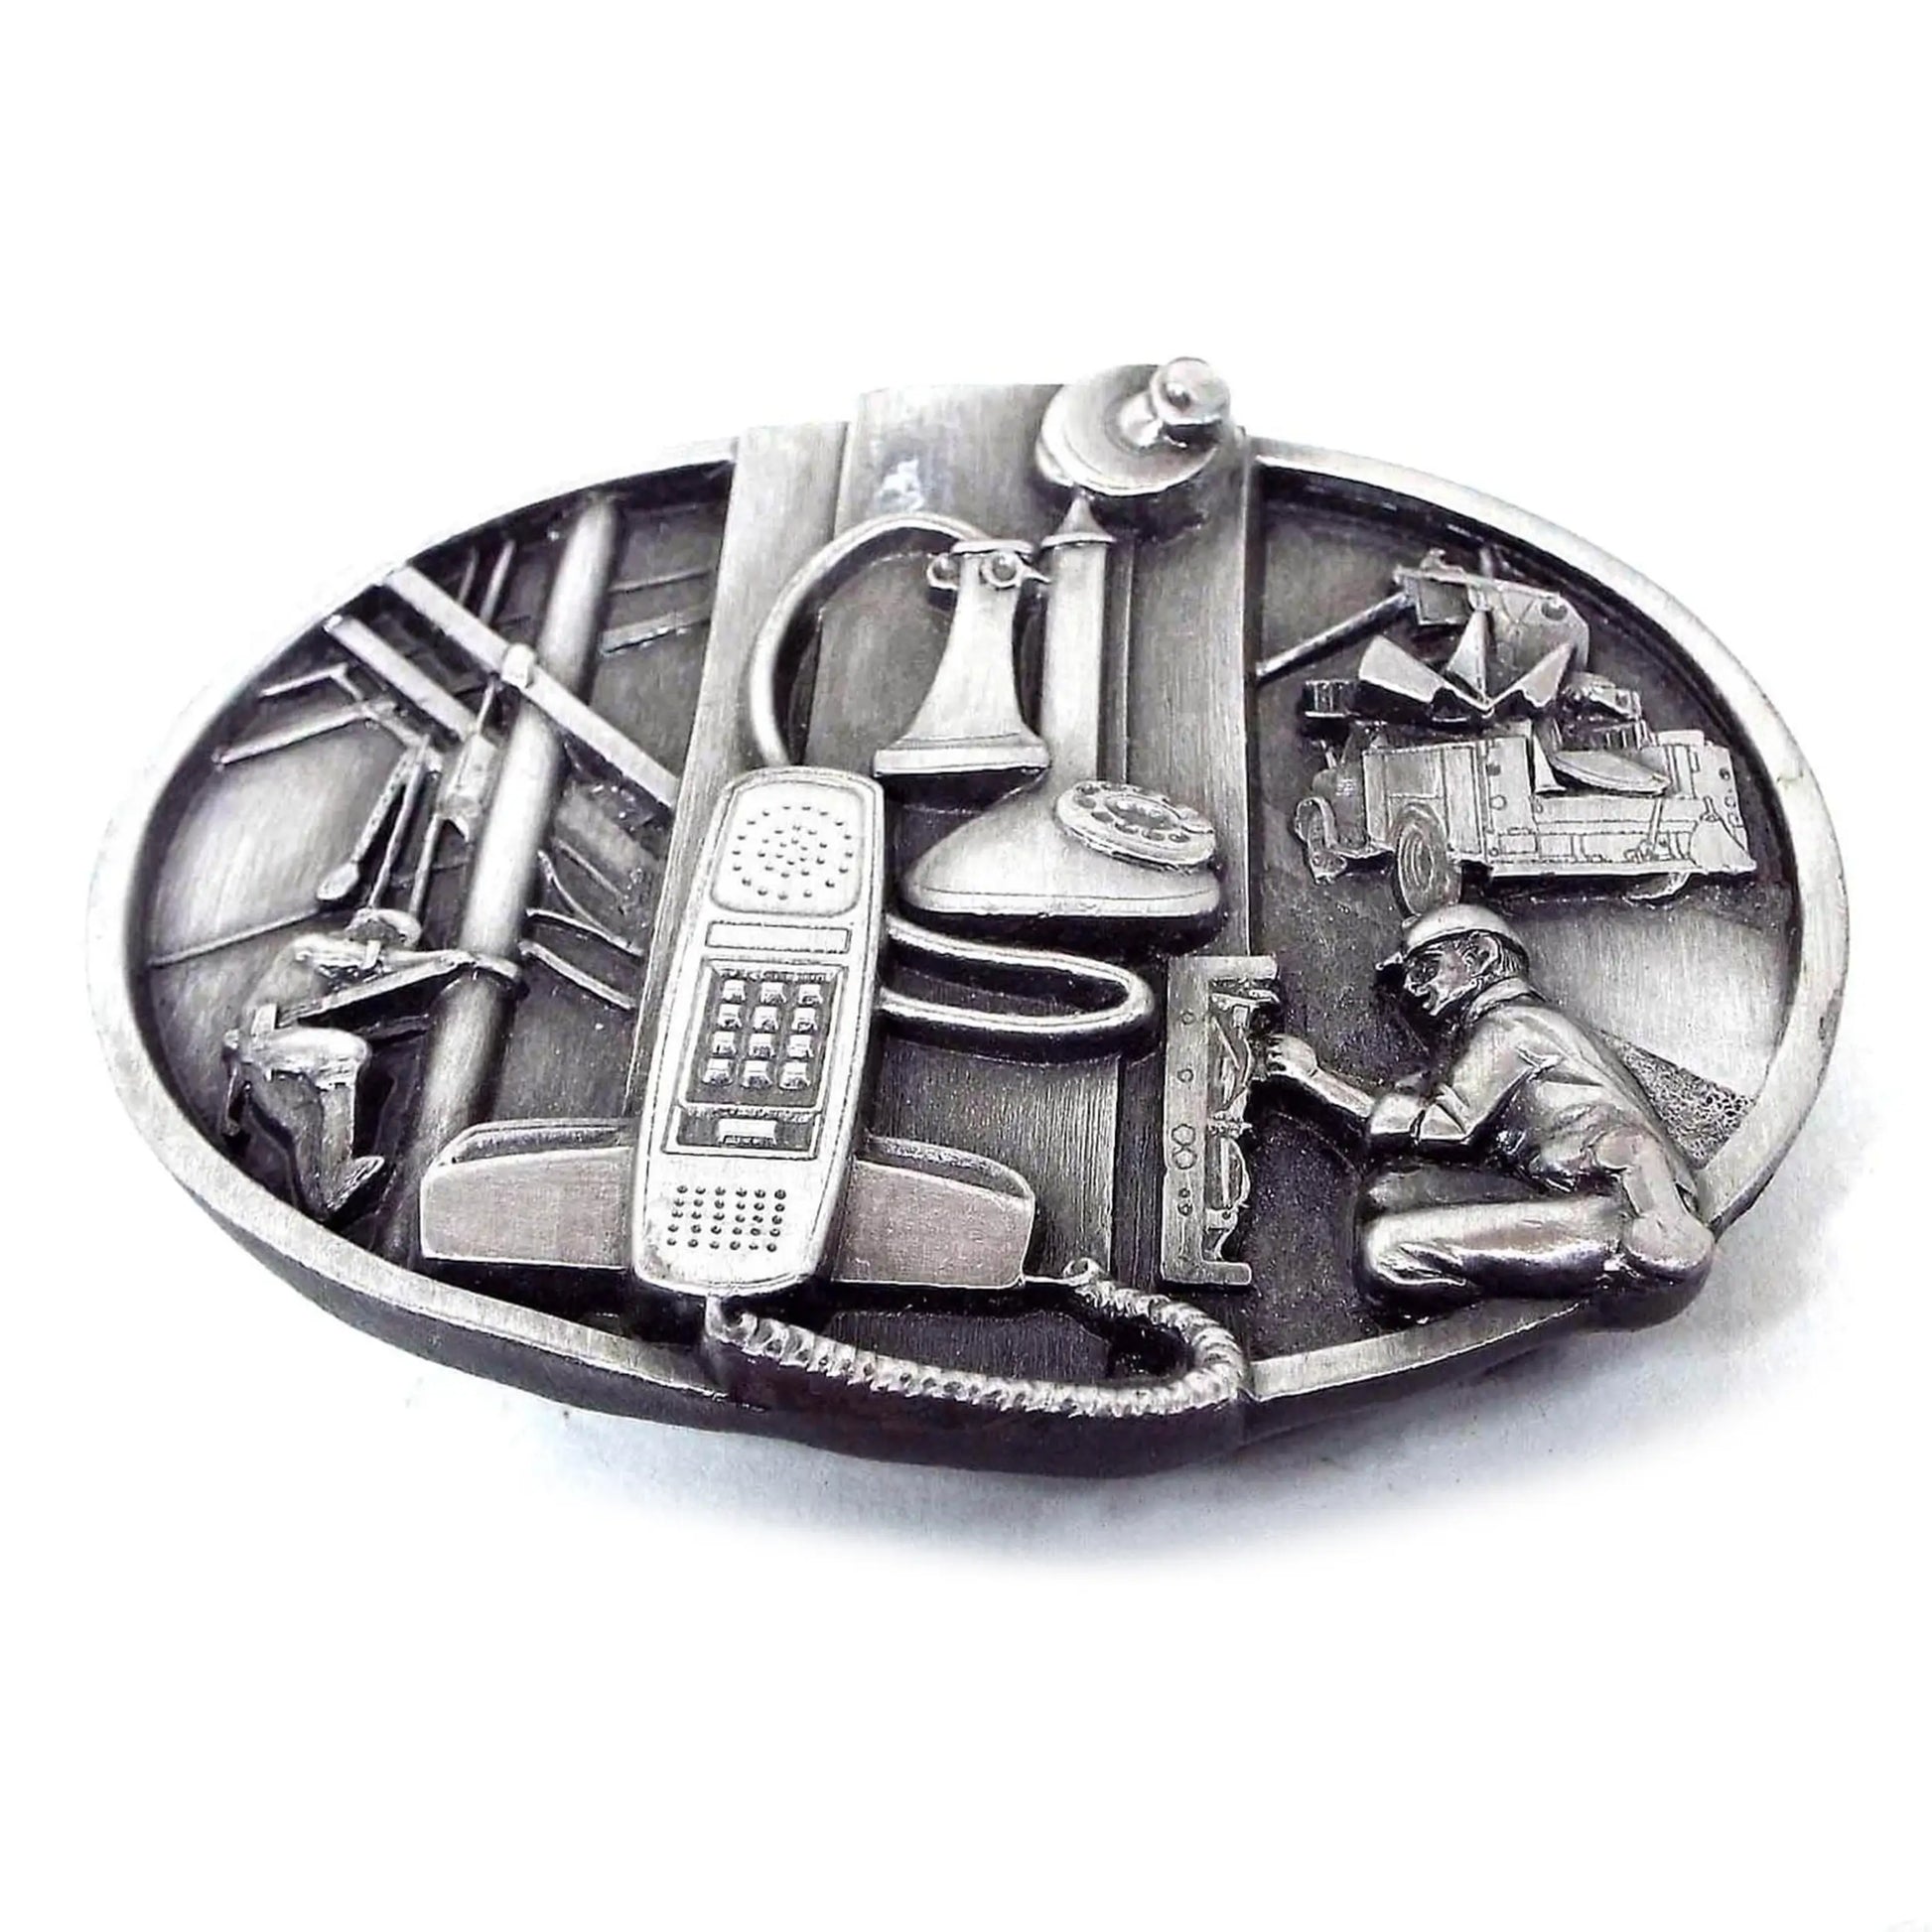 Front view of the retro vintage Sikiyou telecommunications belt buckle. It has a depiction of two old phones on the front and telecommunications workers. It is pewter gray in color.